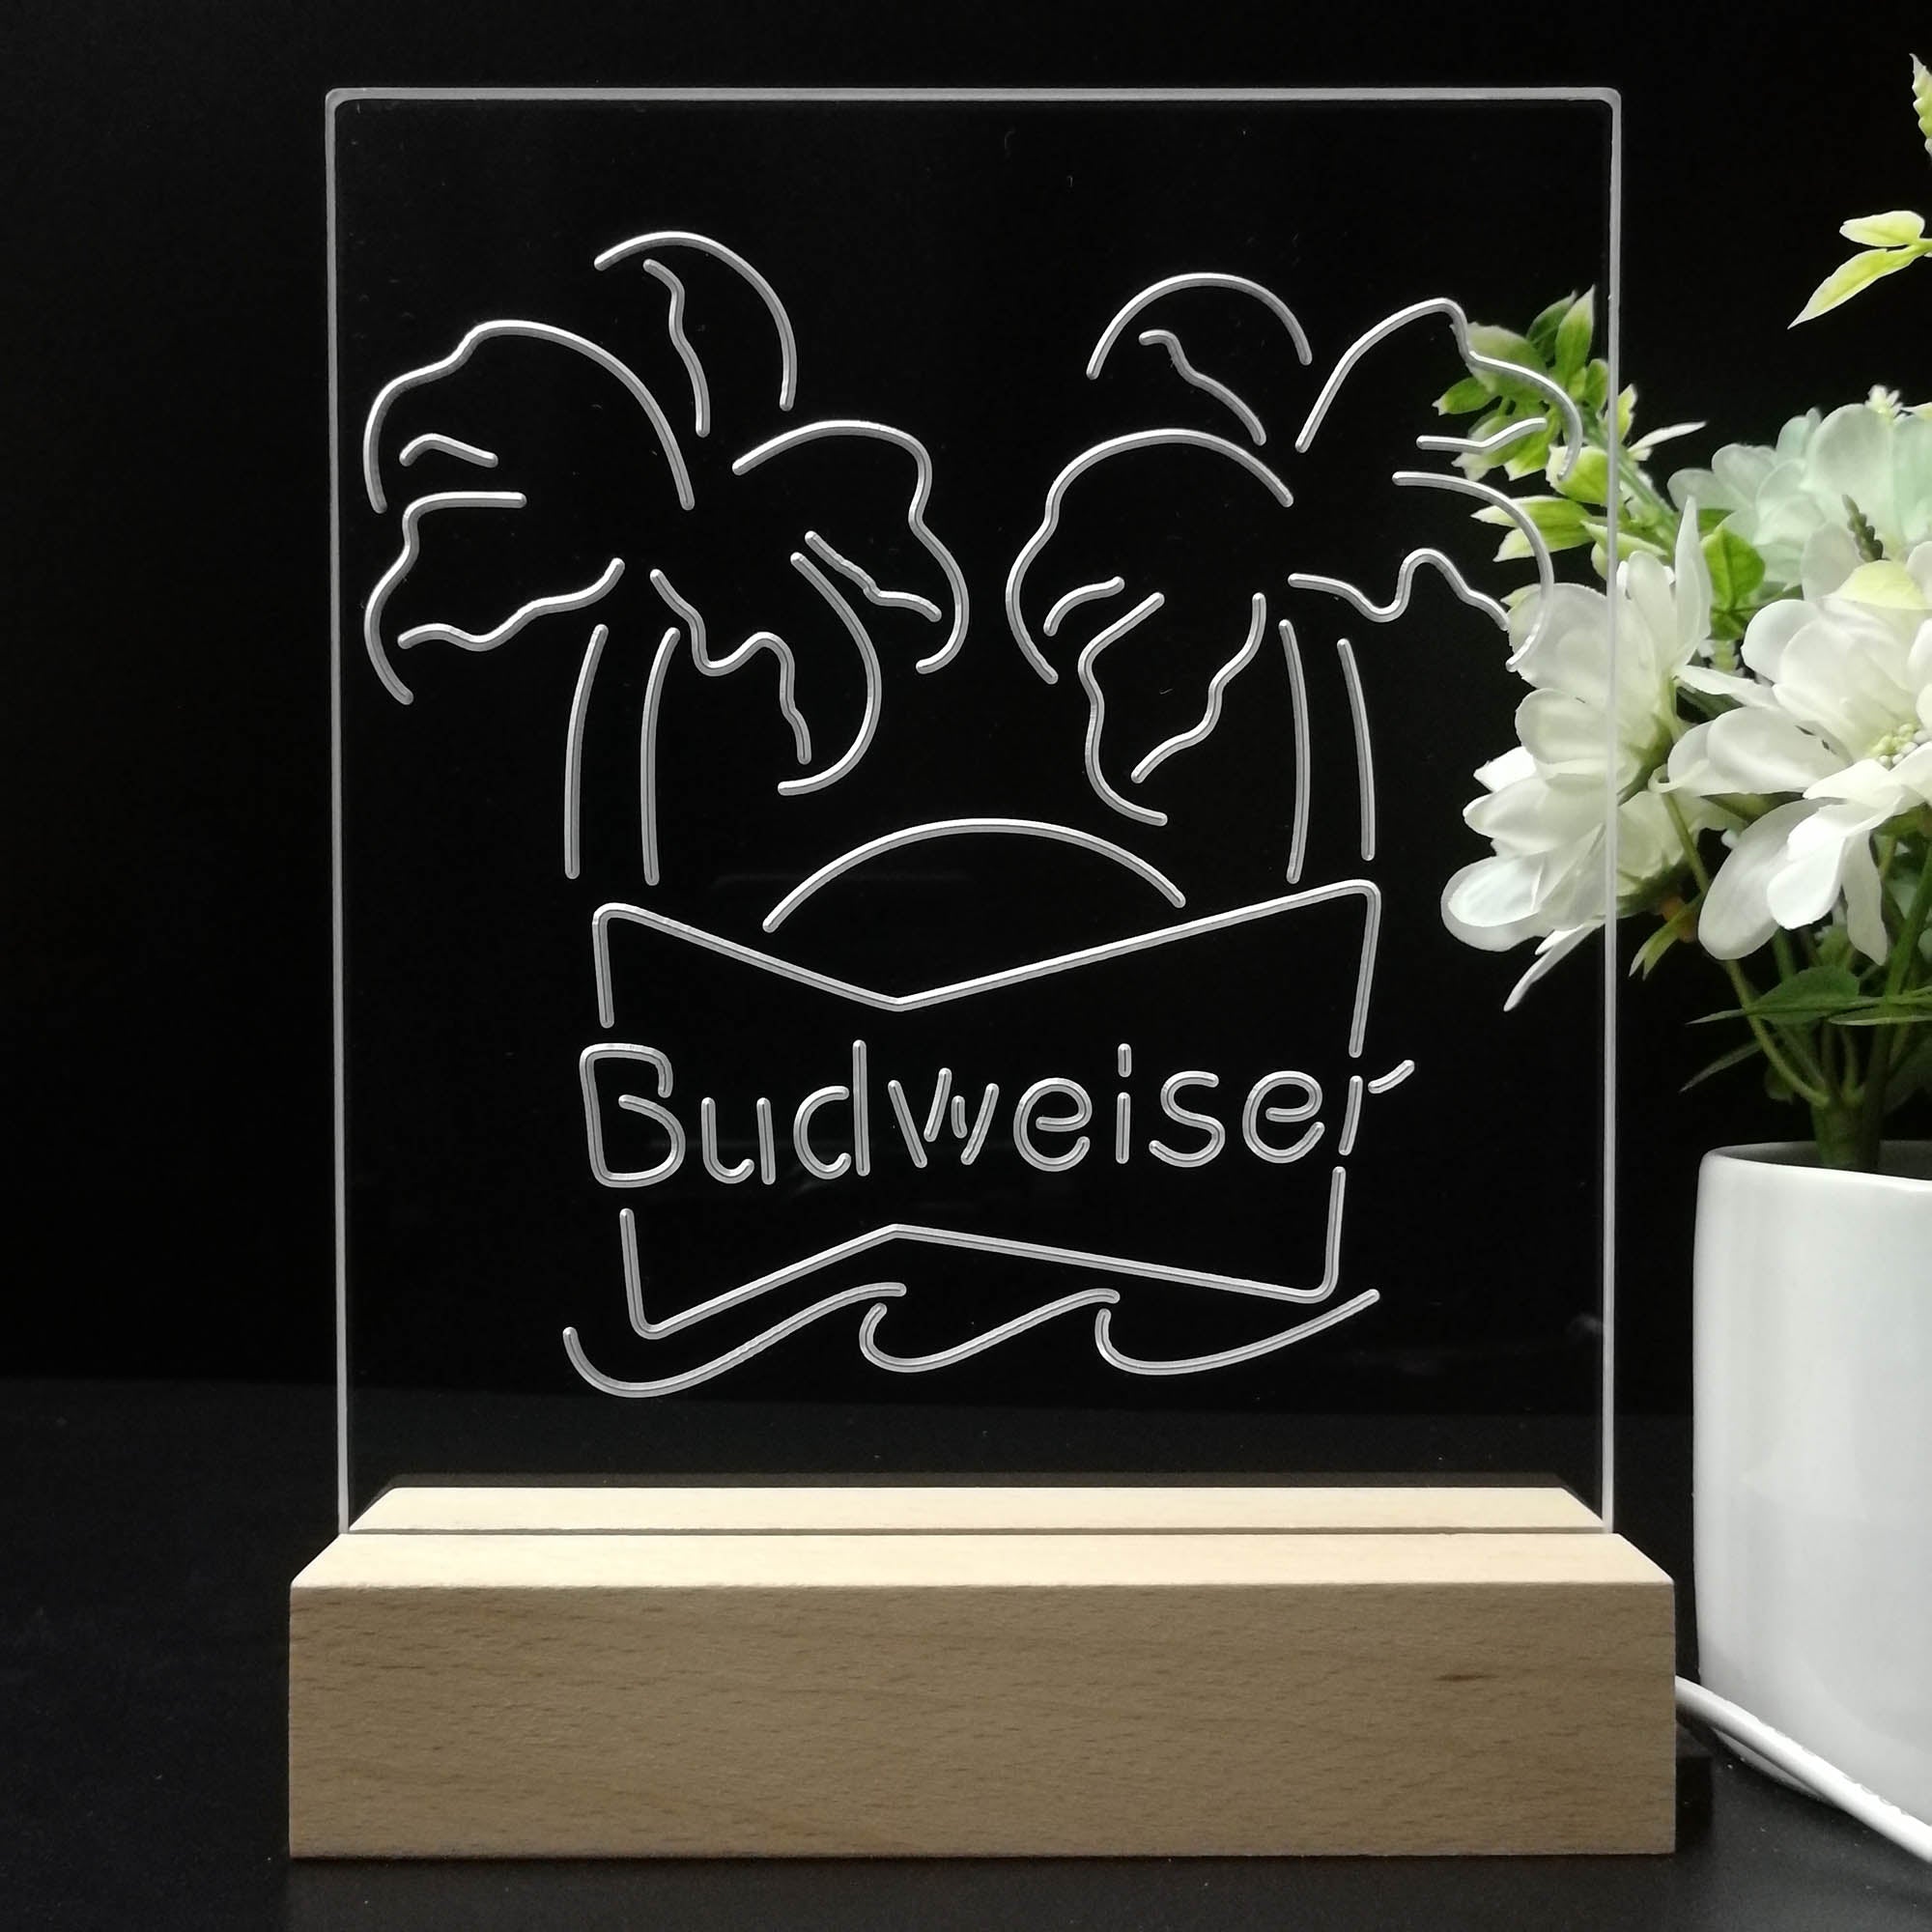 Budweiser Double Palm Tree Beer 3D Illusion Night Light Desk Lamp